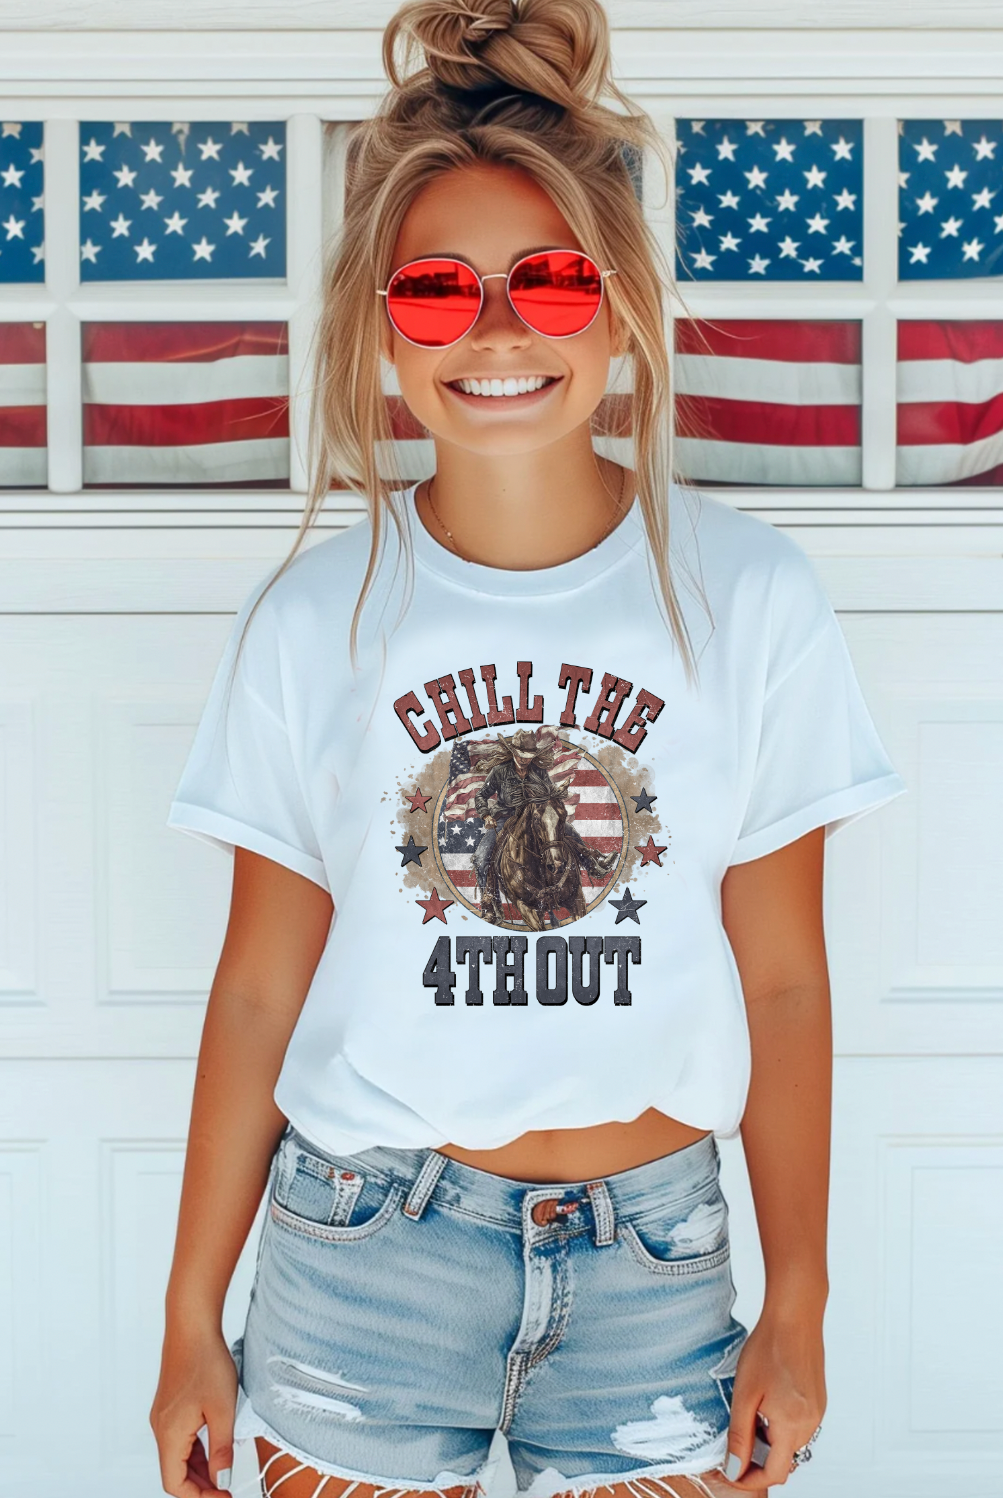 Funny 4th of July Americana Shirt. Chill the 4th Out handmade on a soft Bella and Canvas shirt. Shirt color is white.